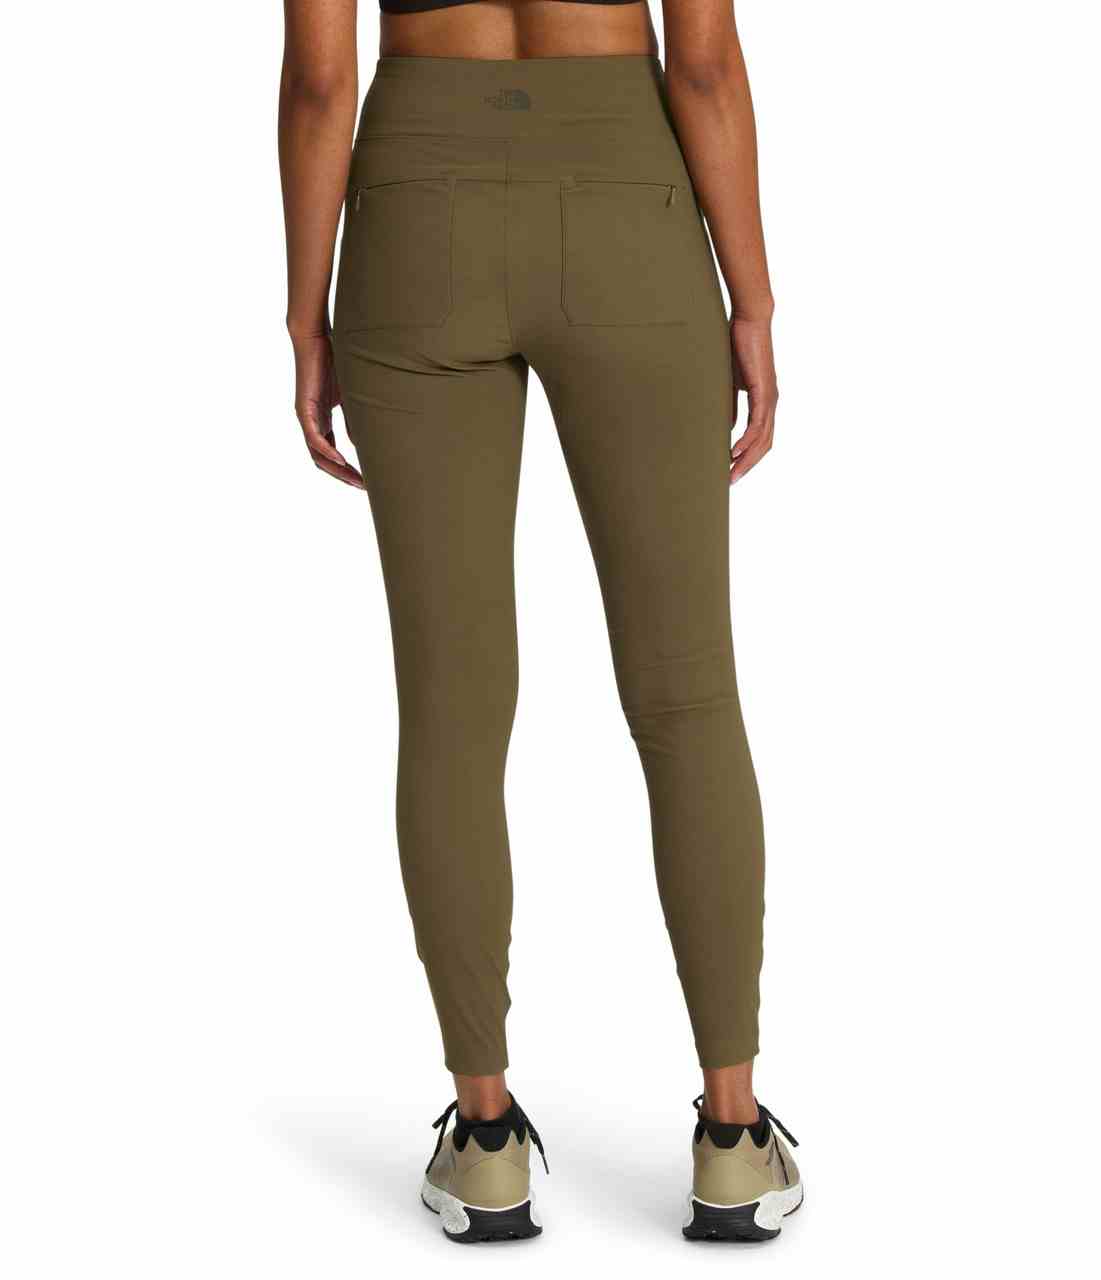 Paramount Hybrid High-Rise Tights Military Olive